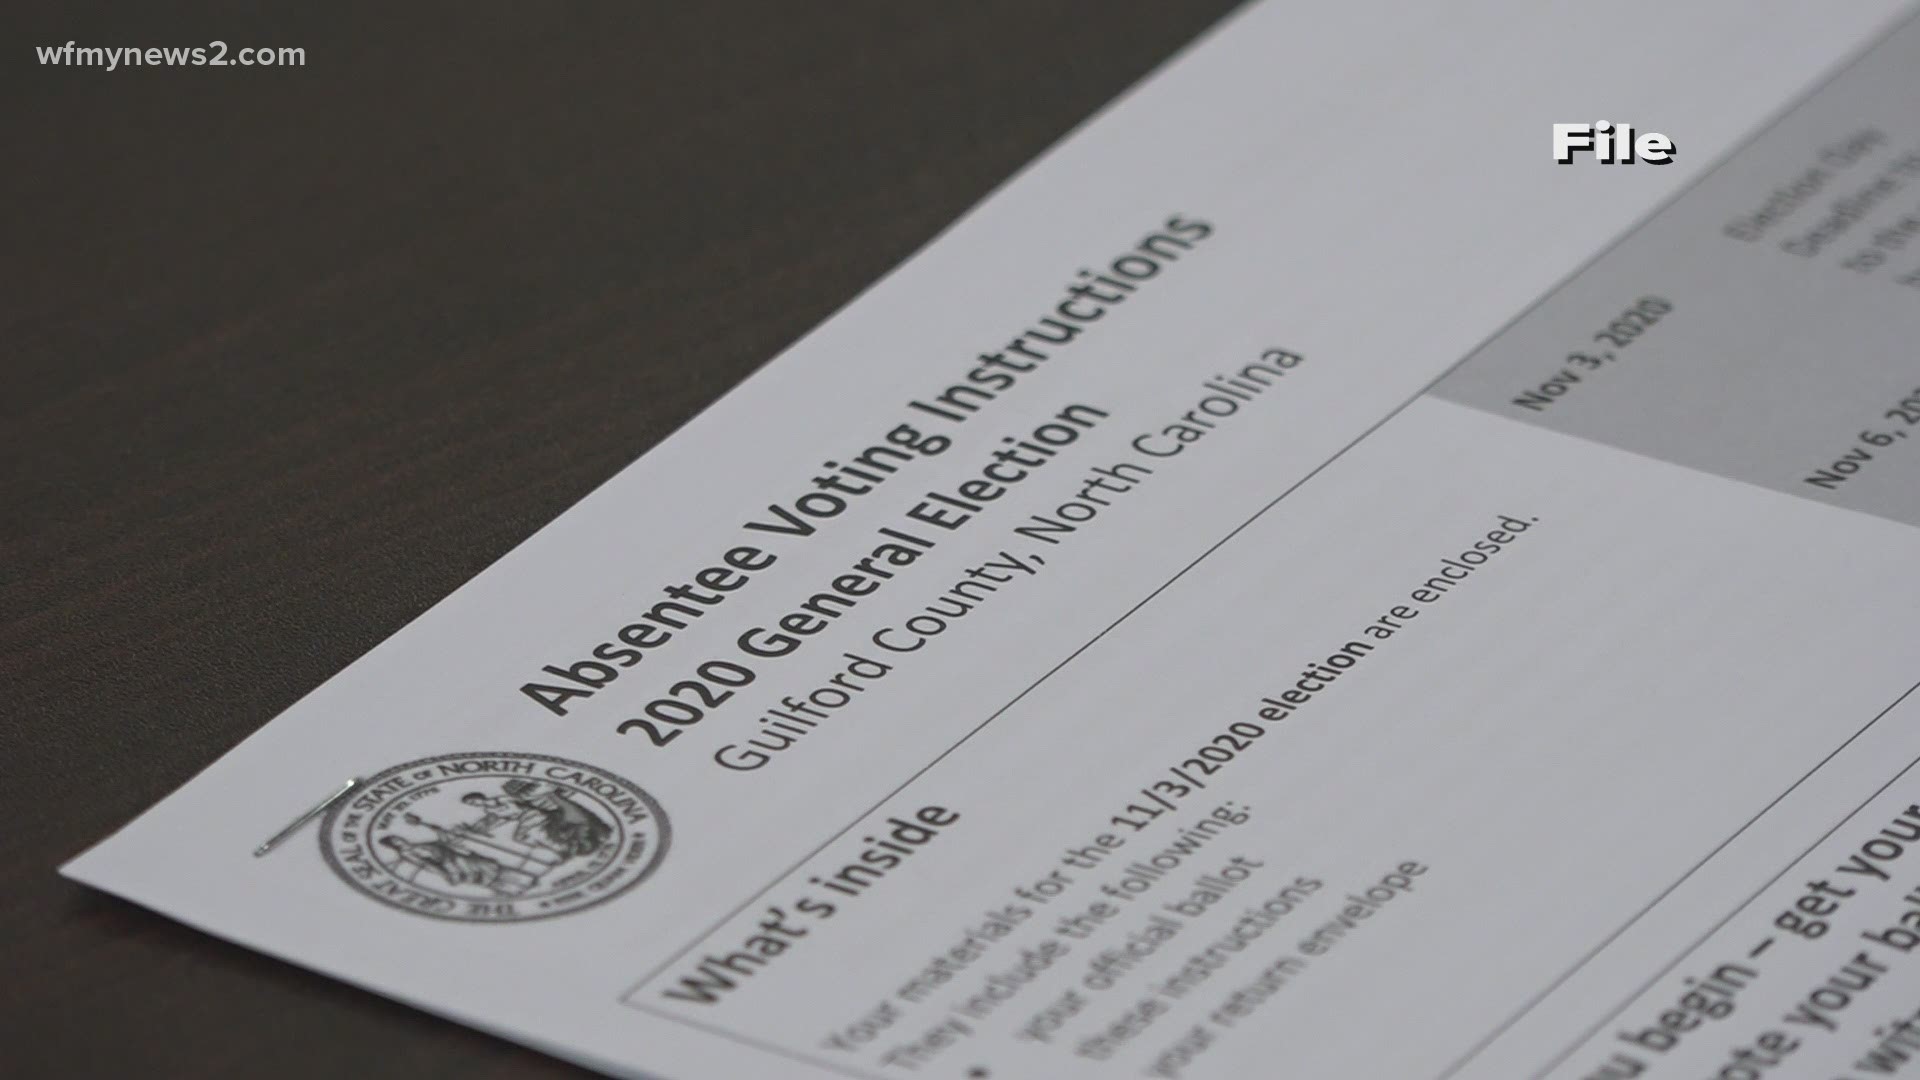 Before, you would have had to completely fill out a new ballot when you made a mistake. Now, the state board of elections wants to make things easier.